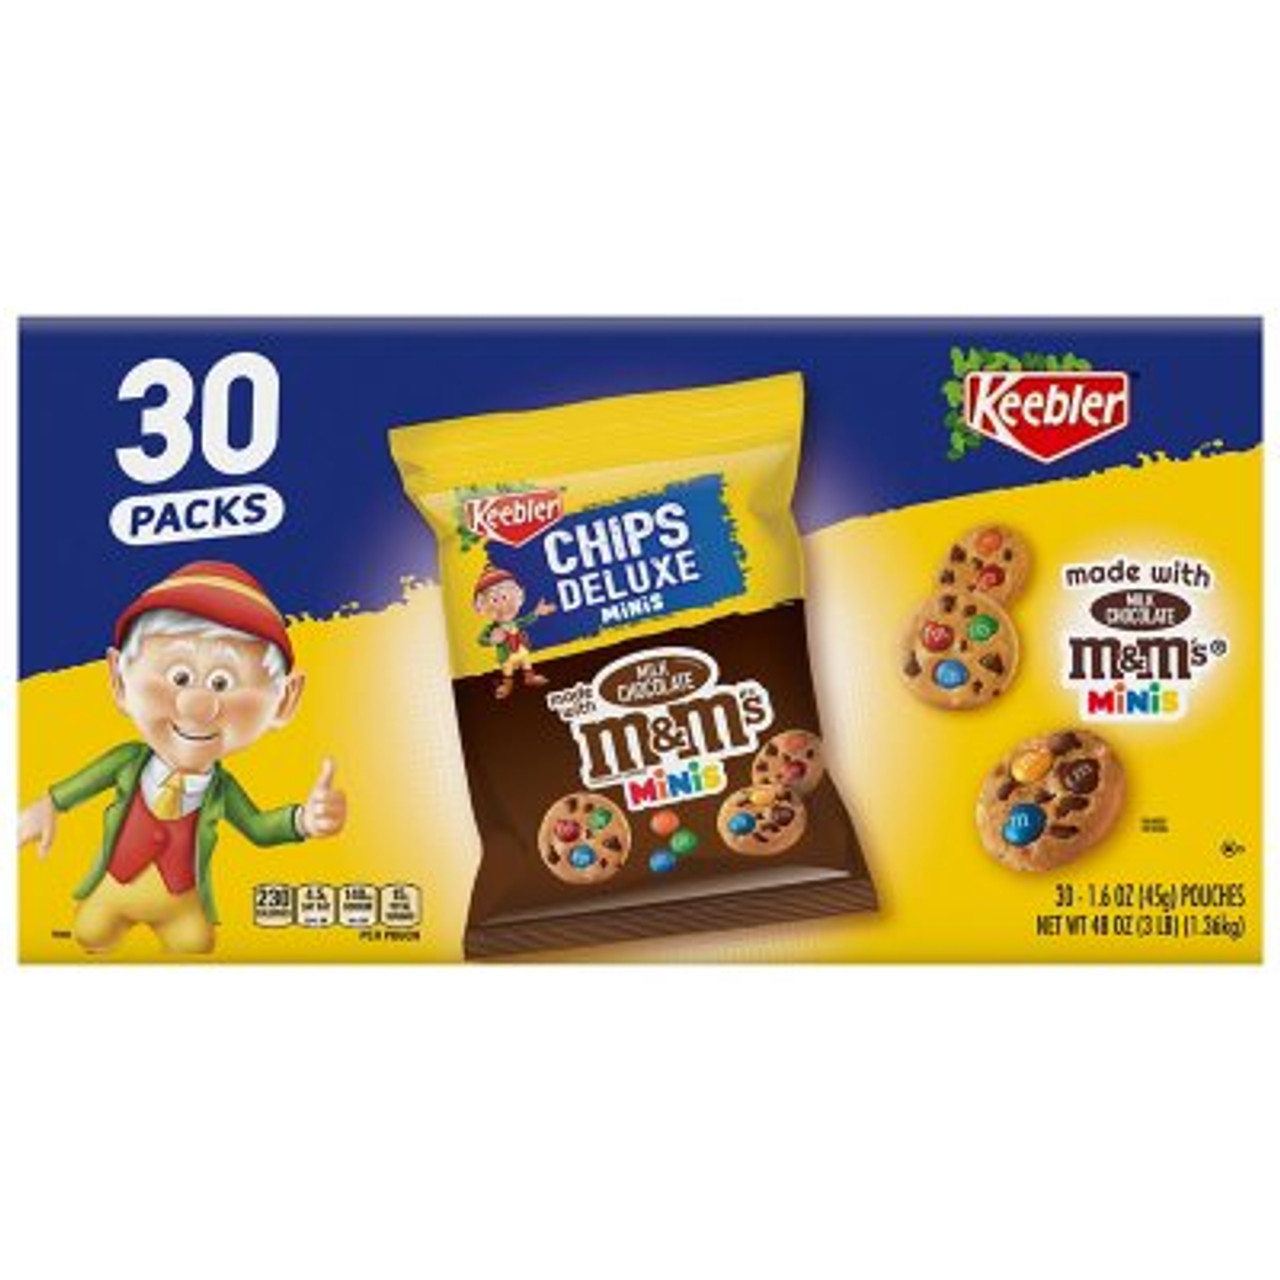 Keebler Chips Deluxe M&M Minis (1.6 oz., 30 pk.) - *In Store